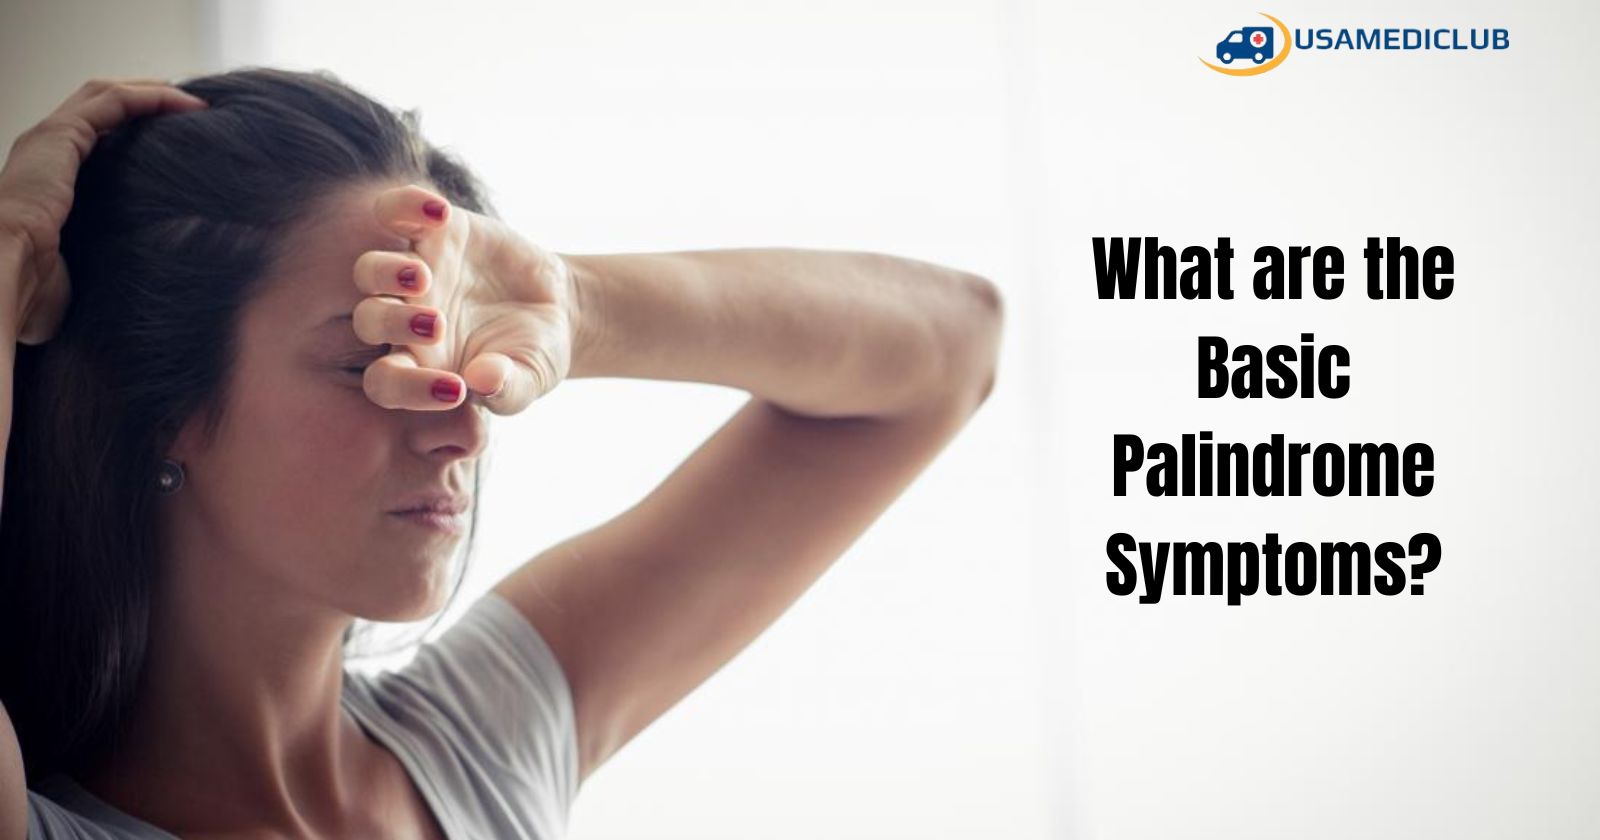 What are the Basic Palindrome Symptoms?